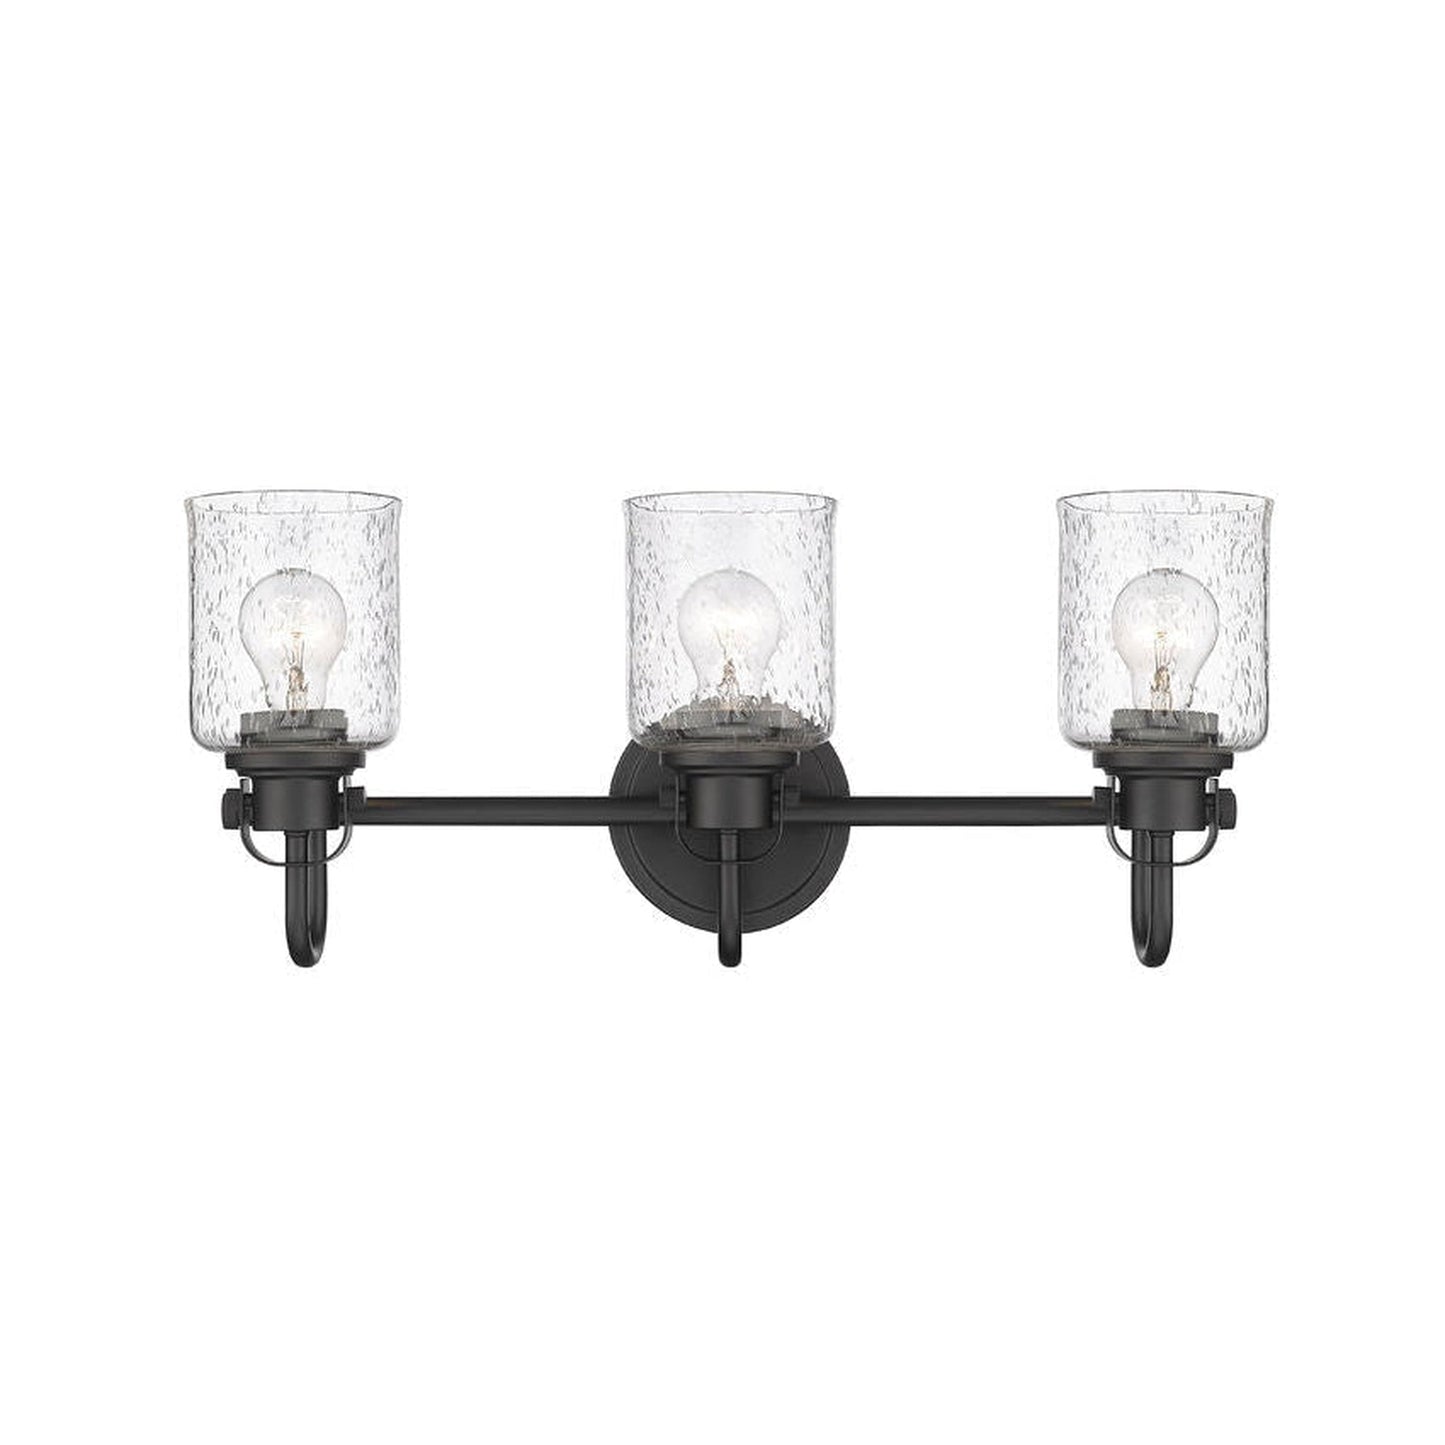 Z-Lite Kinsley 22" 3-Light Matte Black Vanity Light With Clear Seeded Glass Shade